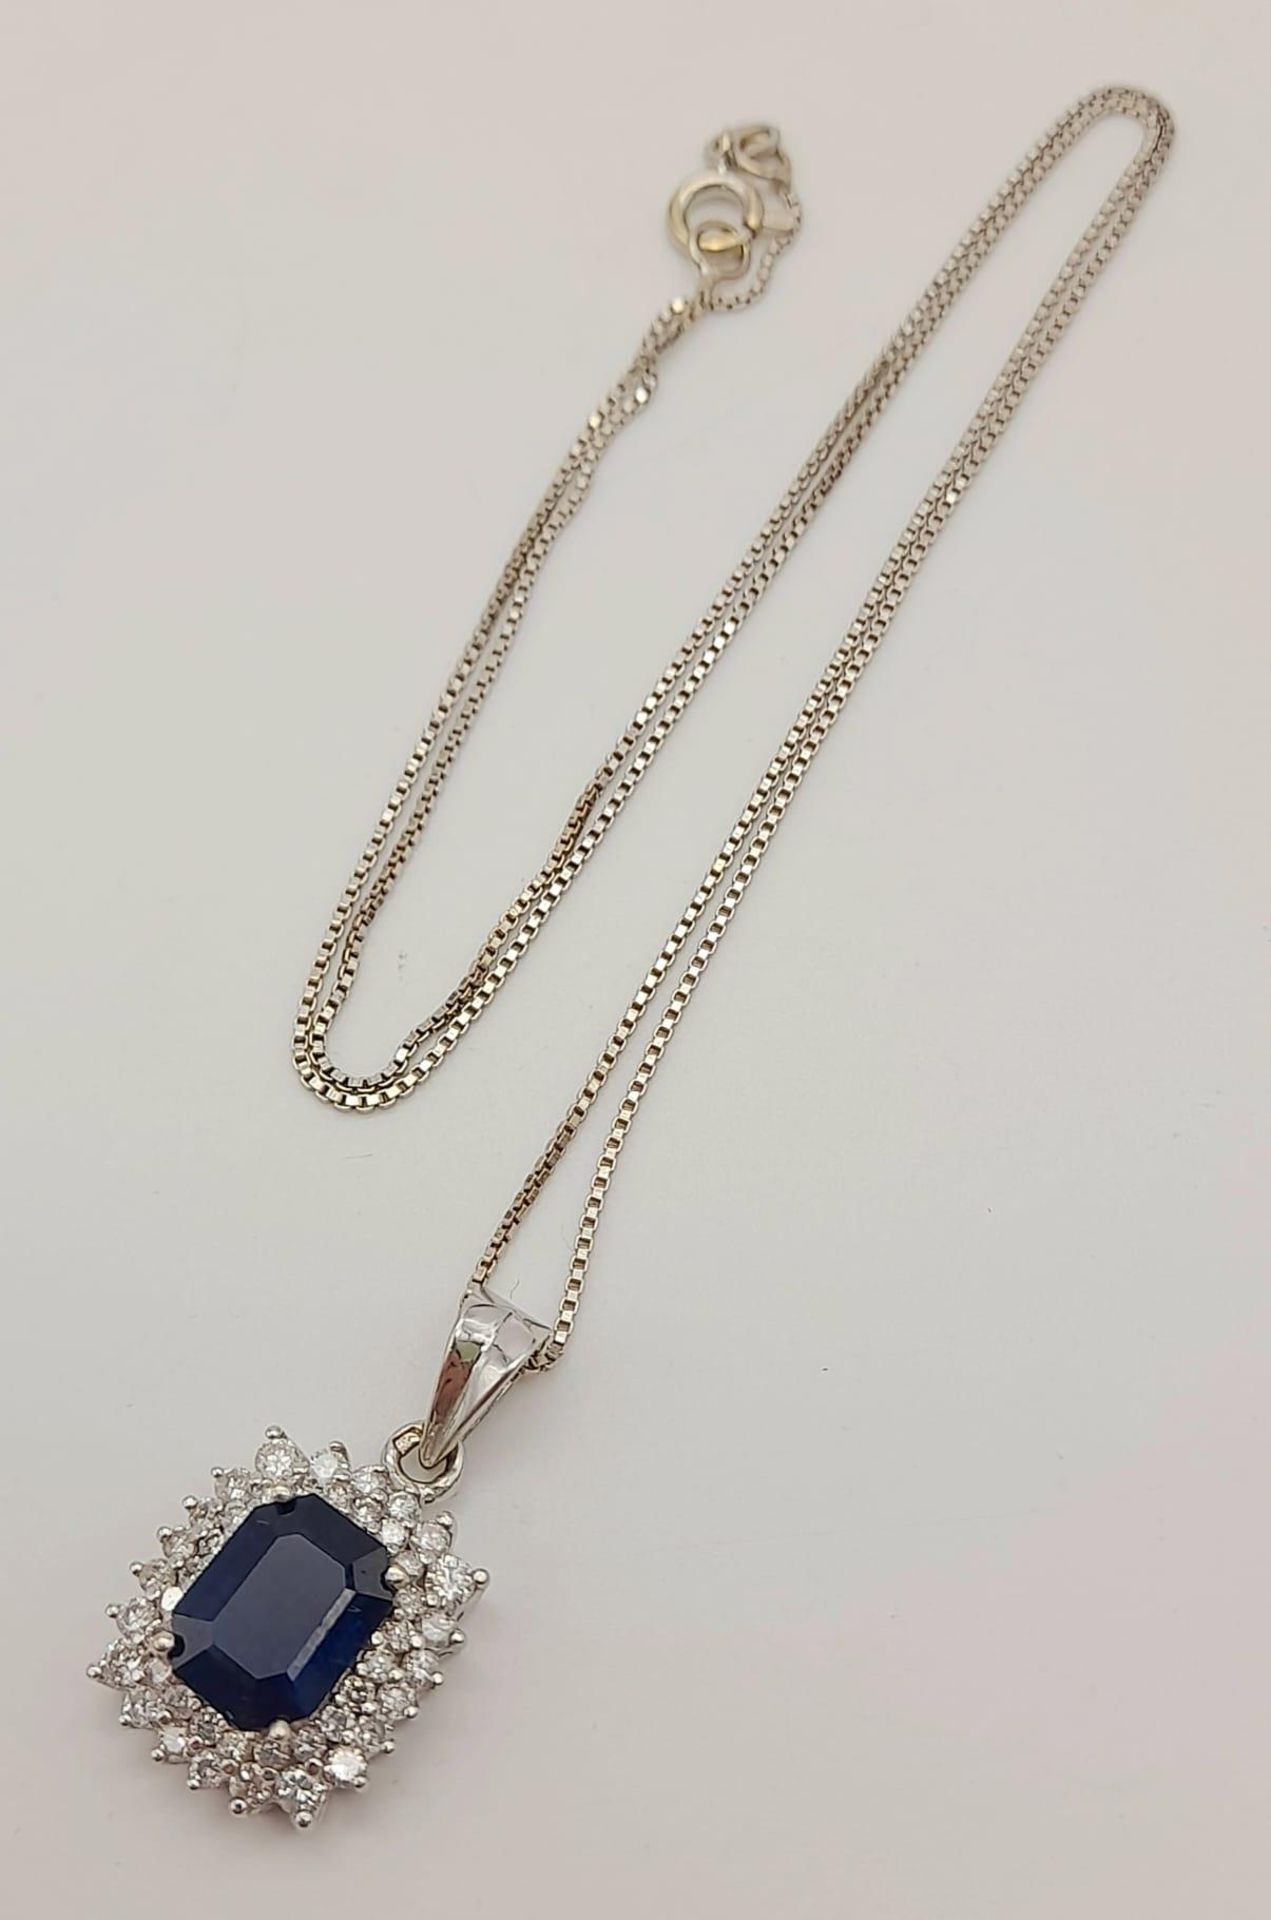 An 18K White Gold, Sapphire and Diamond Pendant on an 18K White Gold Necklace. Rectangular 2ct